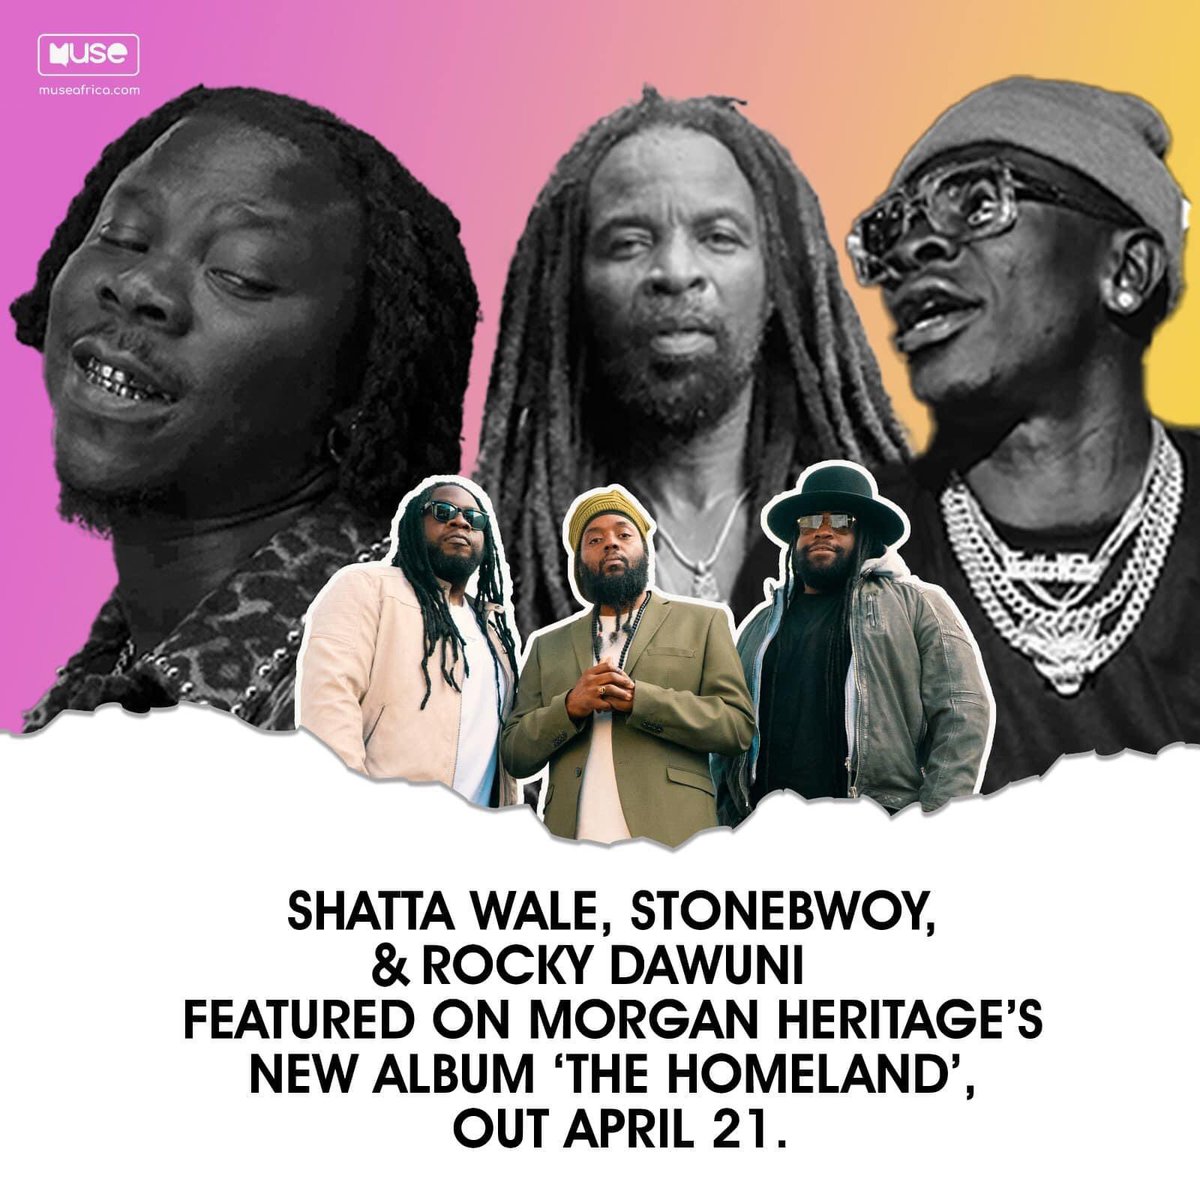 STONEBWOY, Rocky Dawuni and the REST has been FEATURED on Morgan Heritage ‘s new Album 

#TheHomeLand